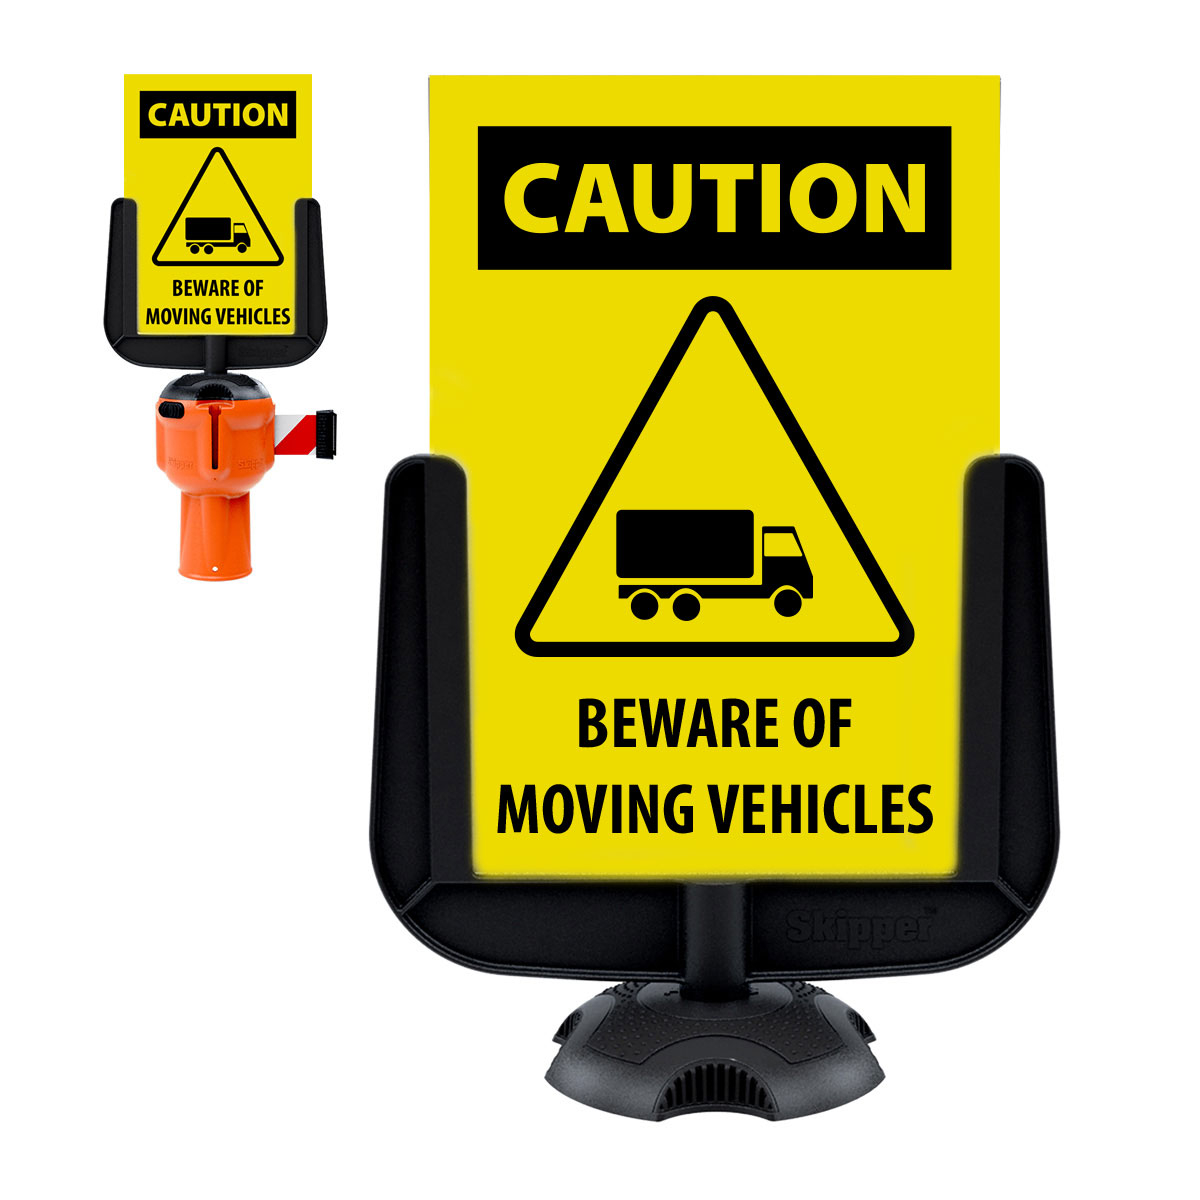 Skipper™ Safety Barrier System Accessories - A4 Sign Holder. Attaches to Skipper and Skipper XS Units, Dummy Unit, Post & Base Cap. Functional Poster Frame.